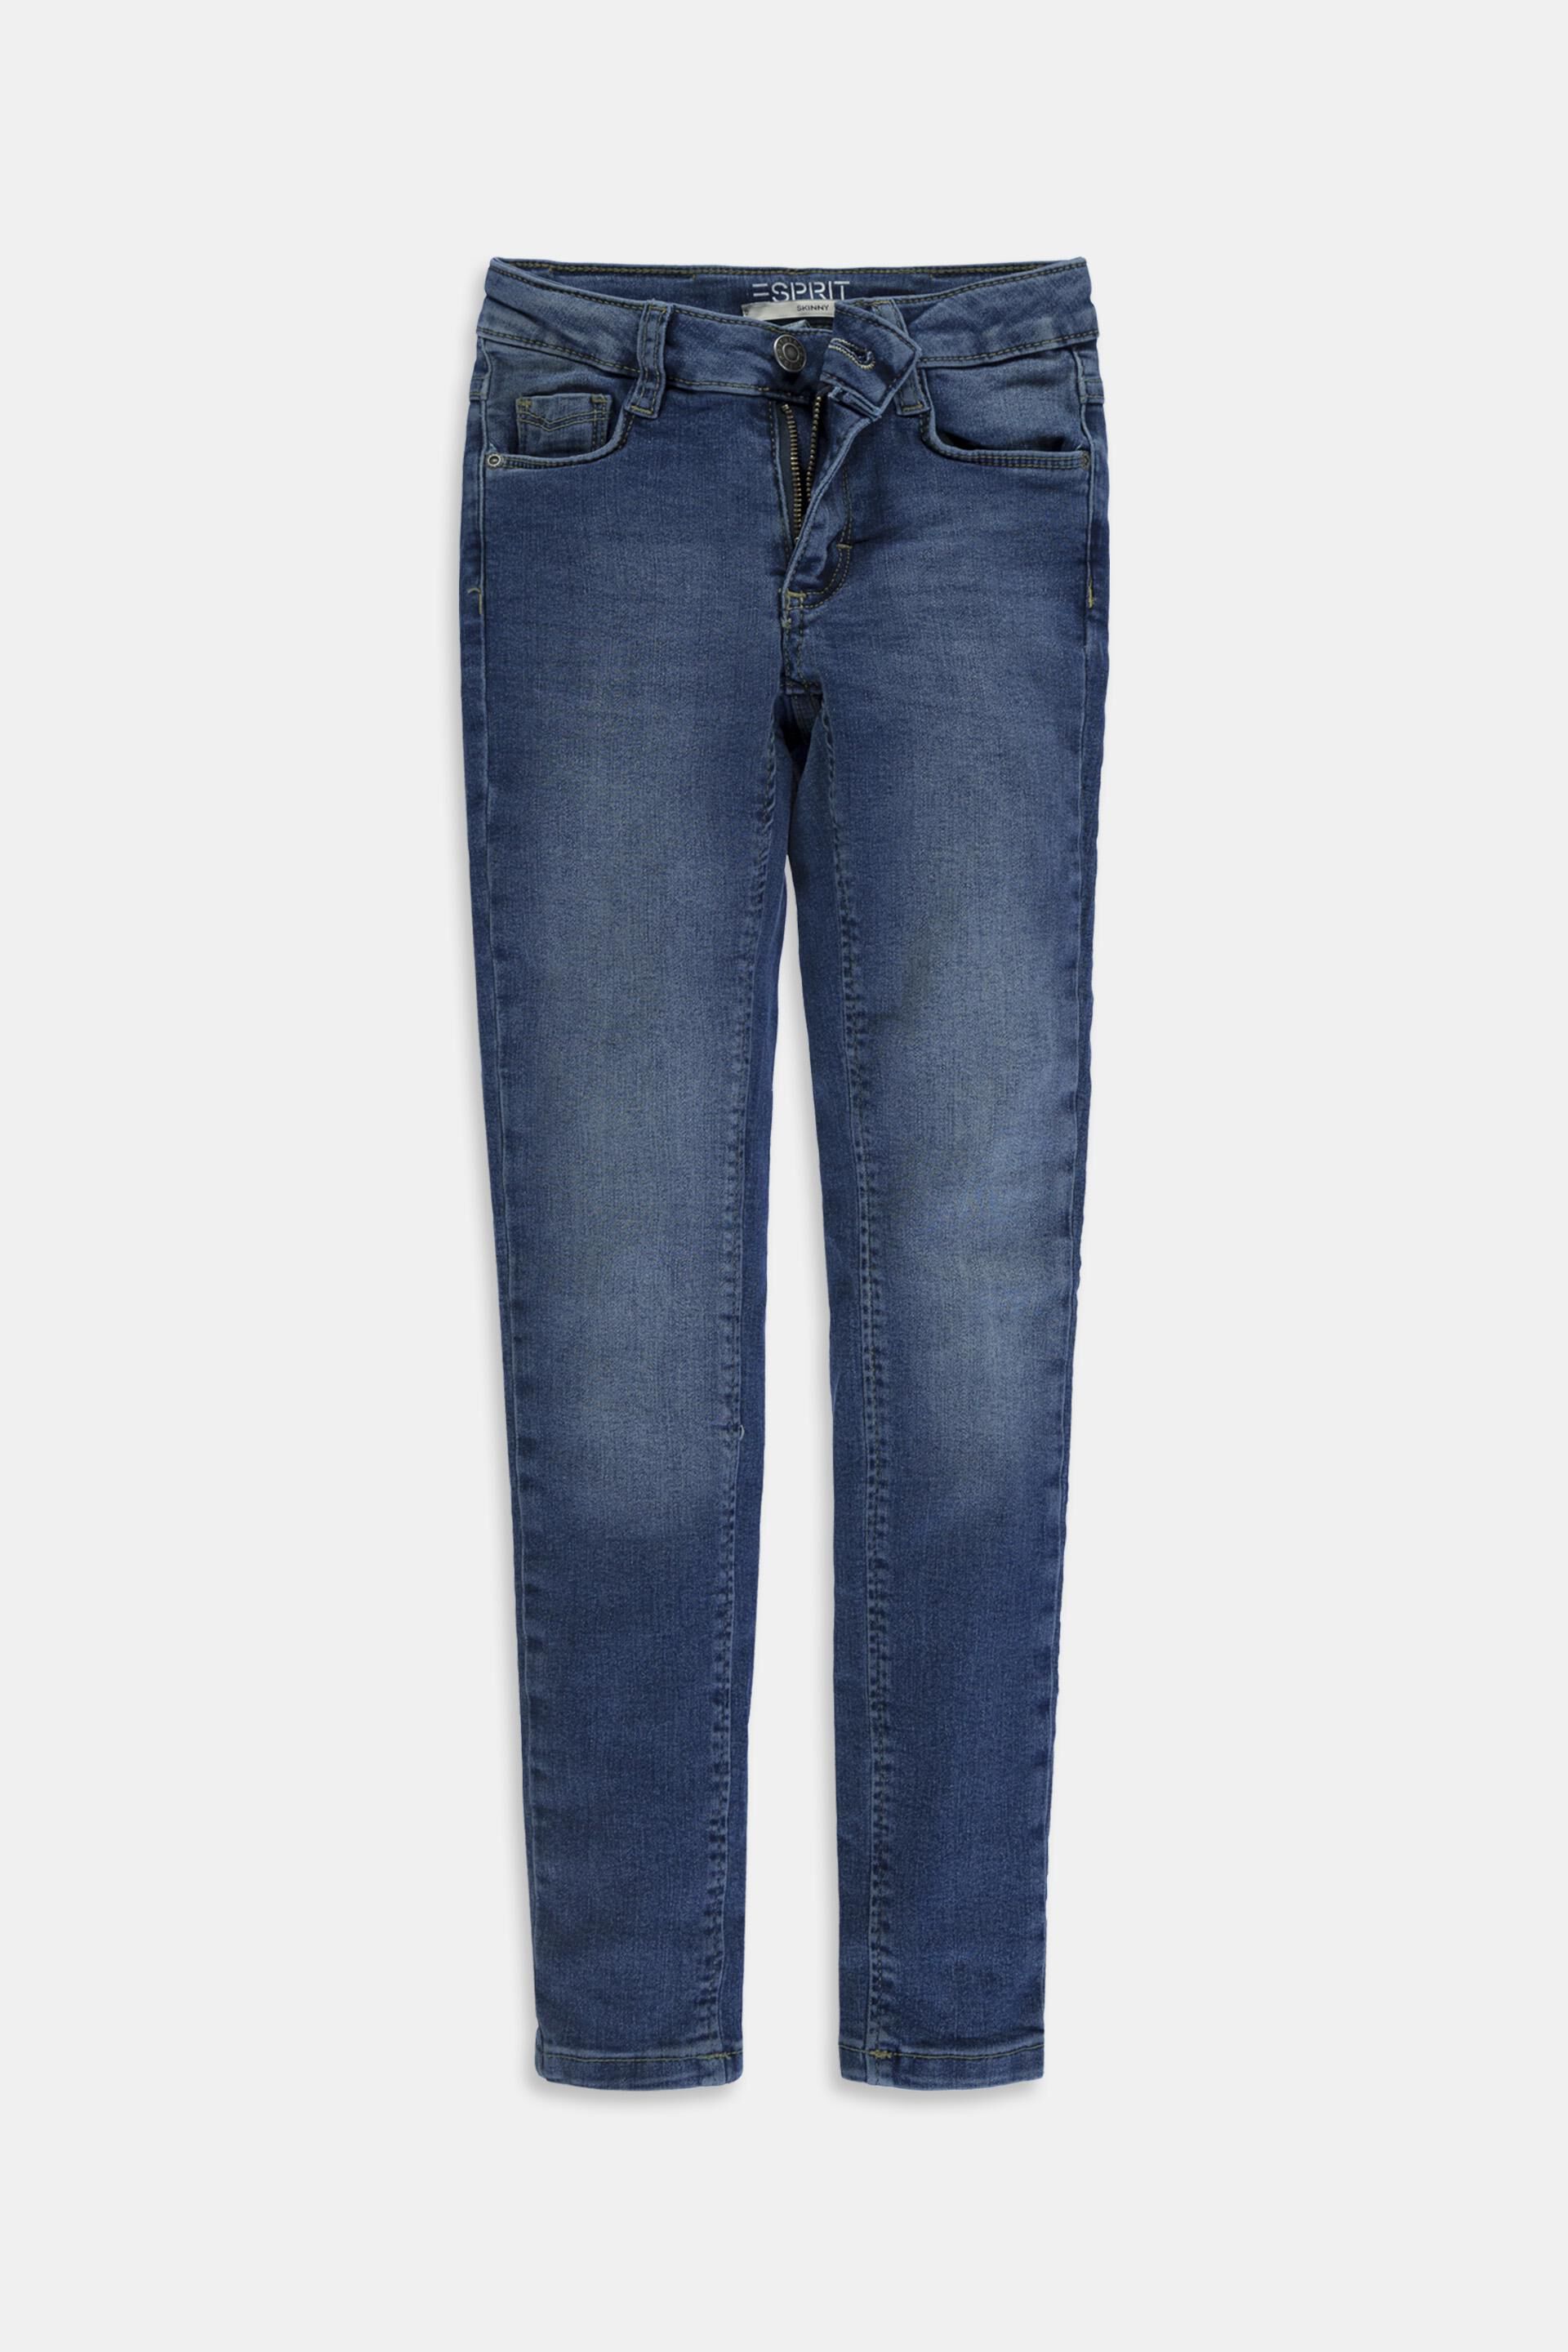 Esprit Teppich Stretch jeans available in different widths with an adjustable waistband